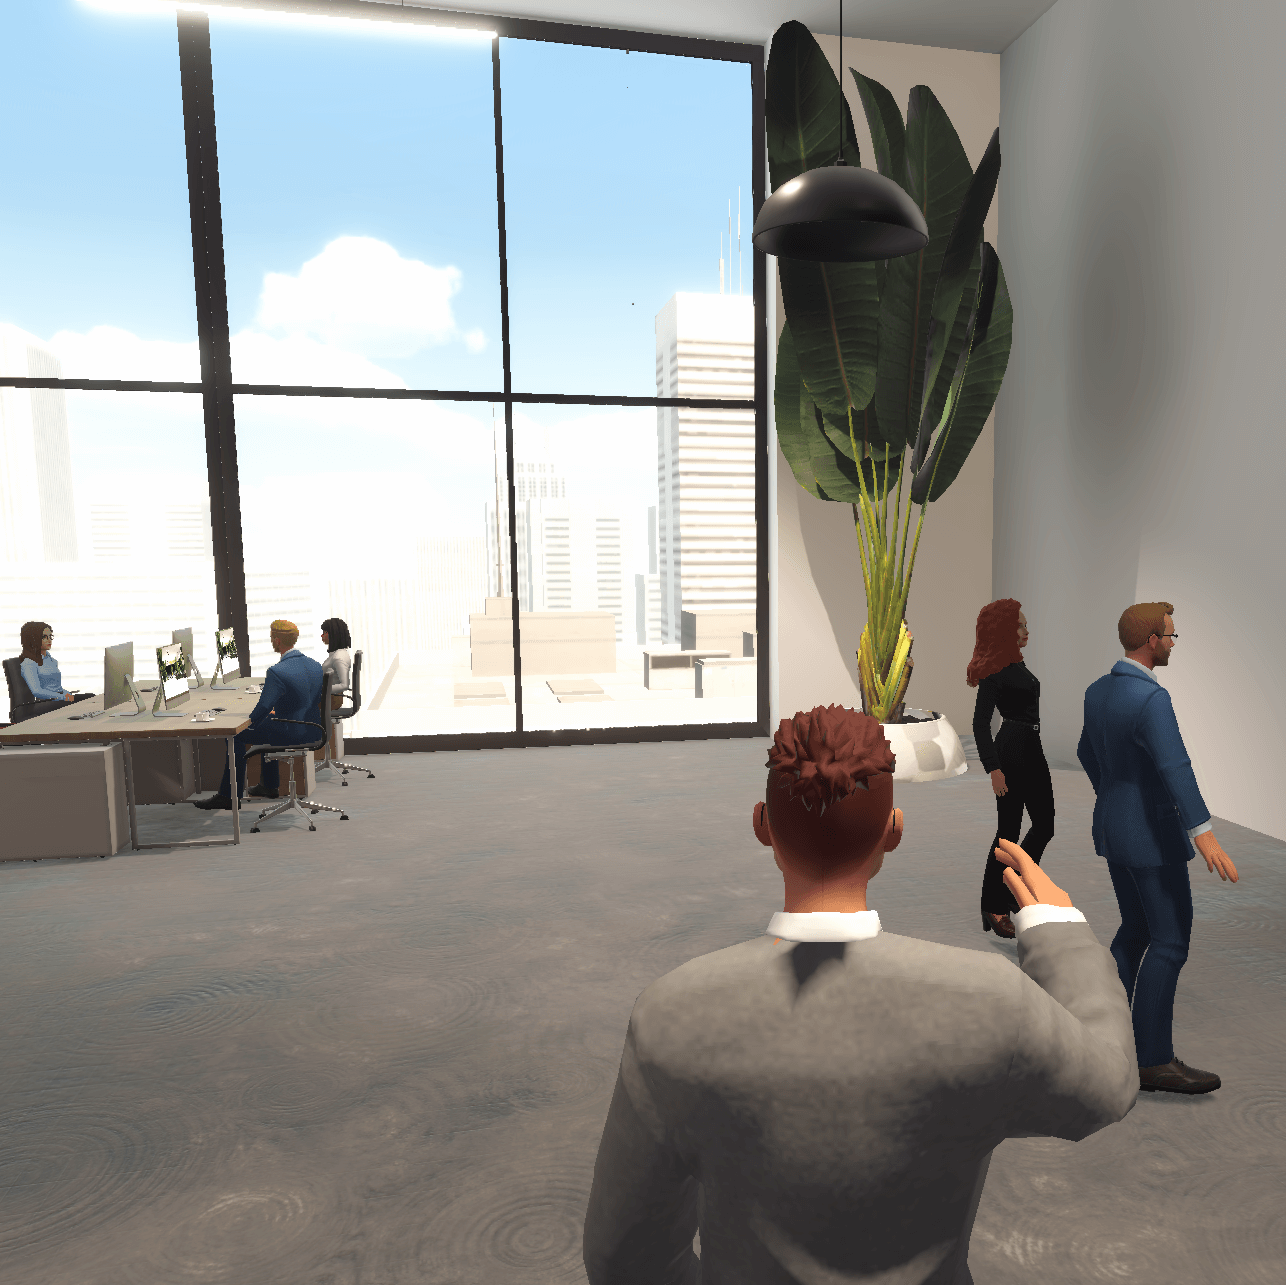 Online Office Metaverse meeting paltform with avatars doing remote work. Some grouped around desks, some hosting presentation. Inspiring virtual office environment. perfect remote collaboration tool for remote work solutions